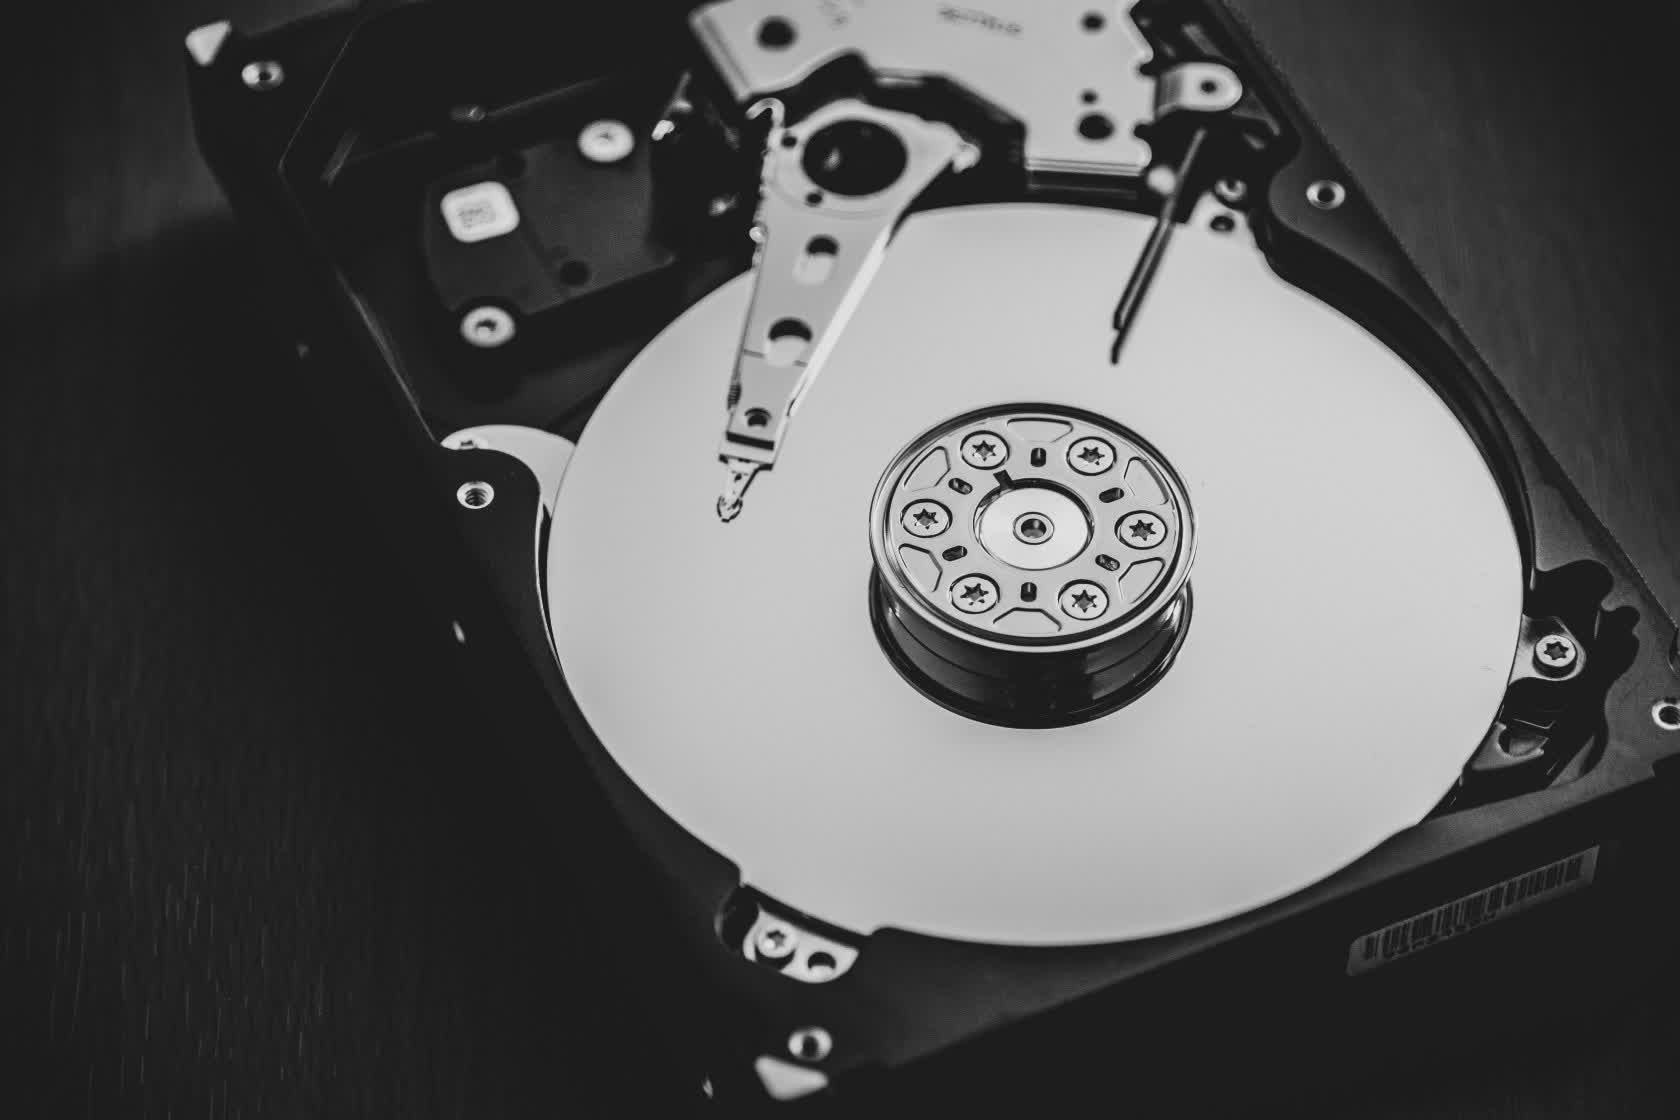 Recent report claims Seagate and Hitachi HDDs are most likely to fail